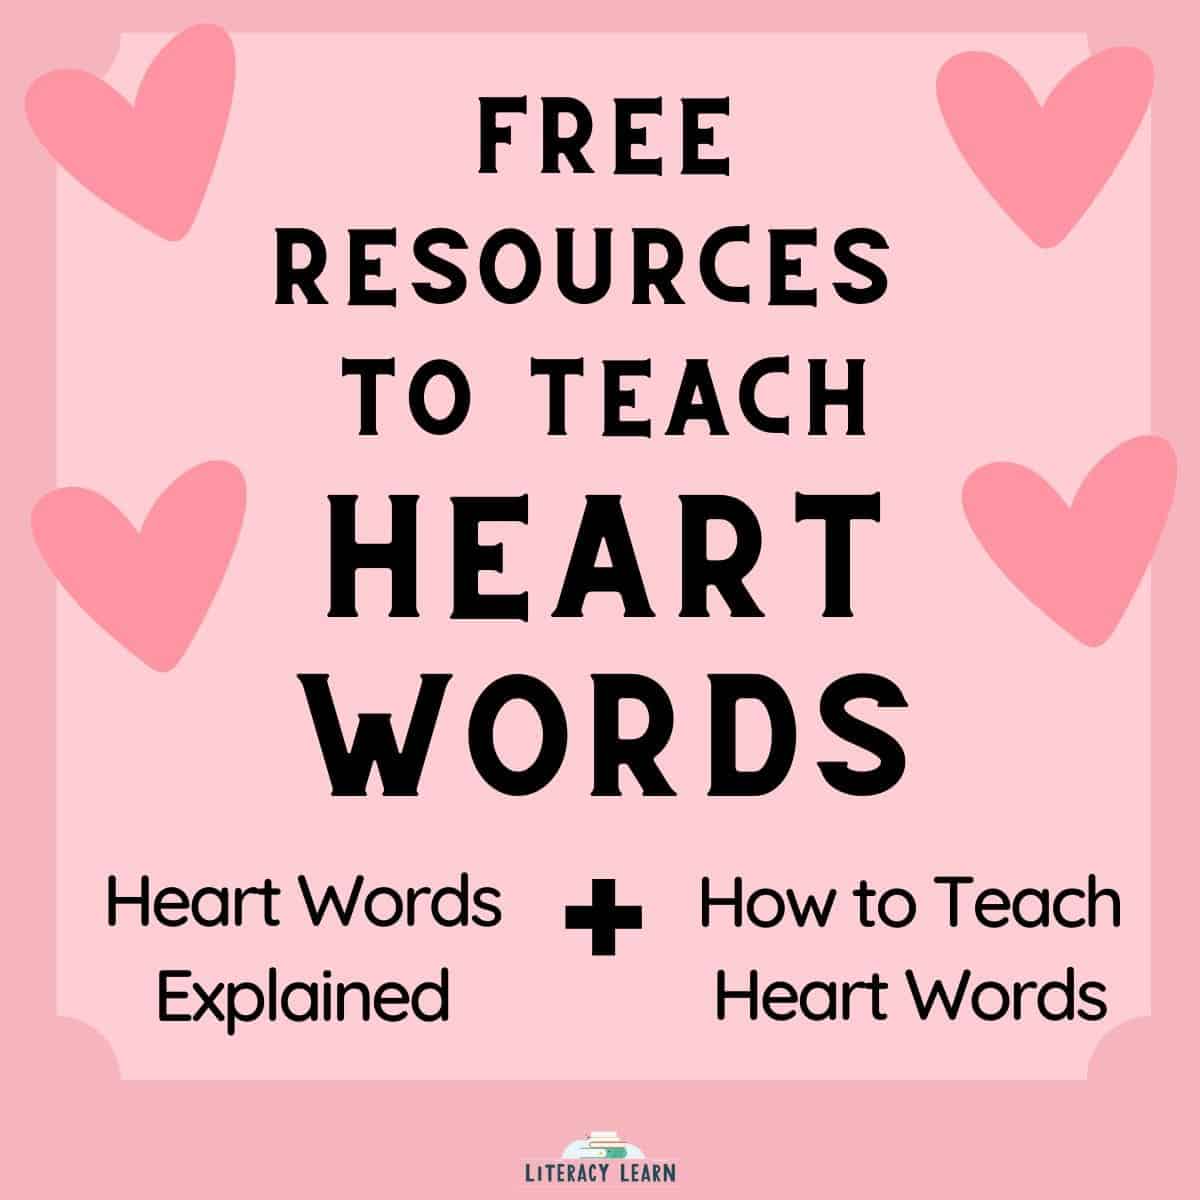 Pink graphic with hearts that says "Free Resources To Teach Heart Words."